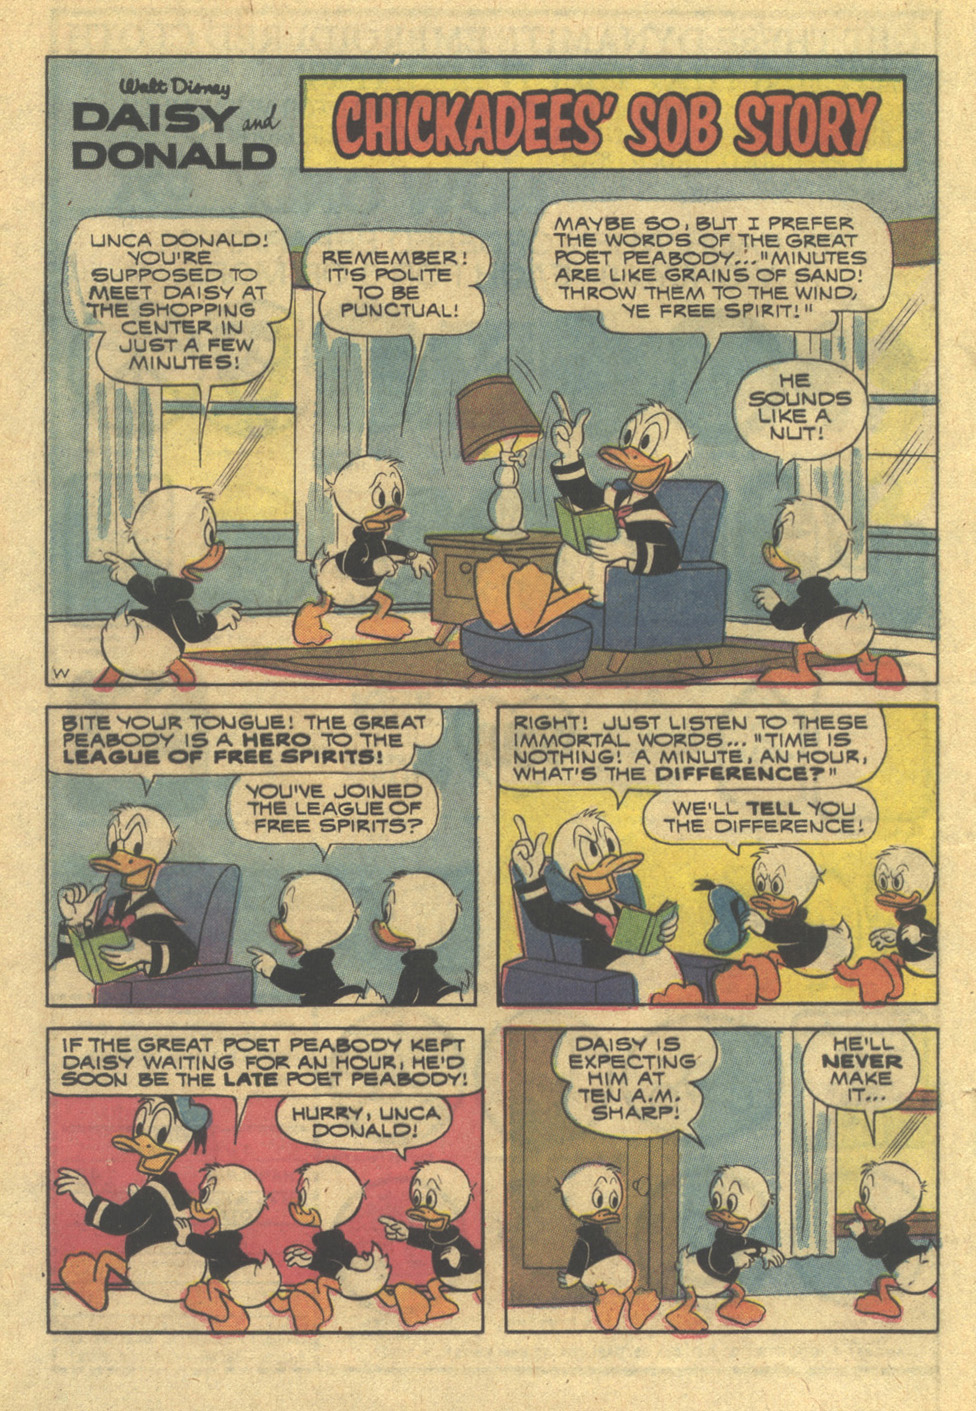 Read online Walt Disney Daisy and Donald comic -  Issue #3 - 20